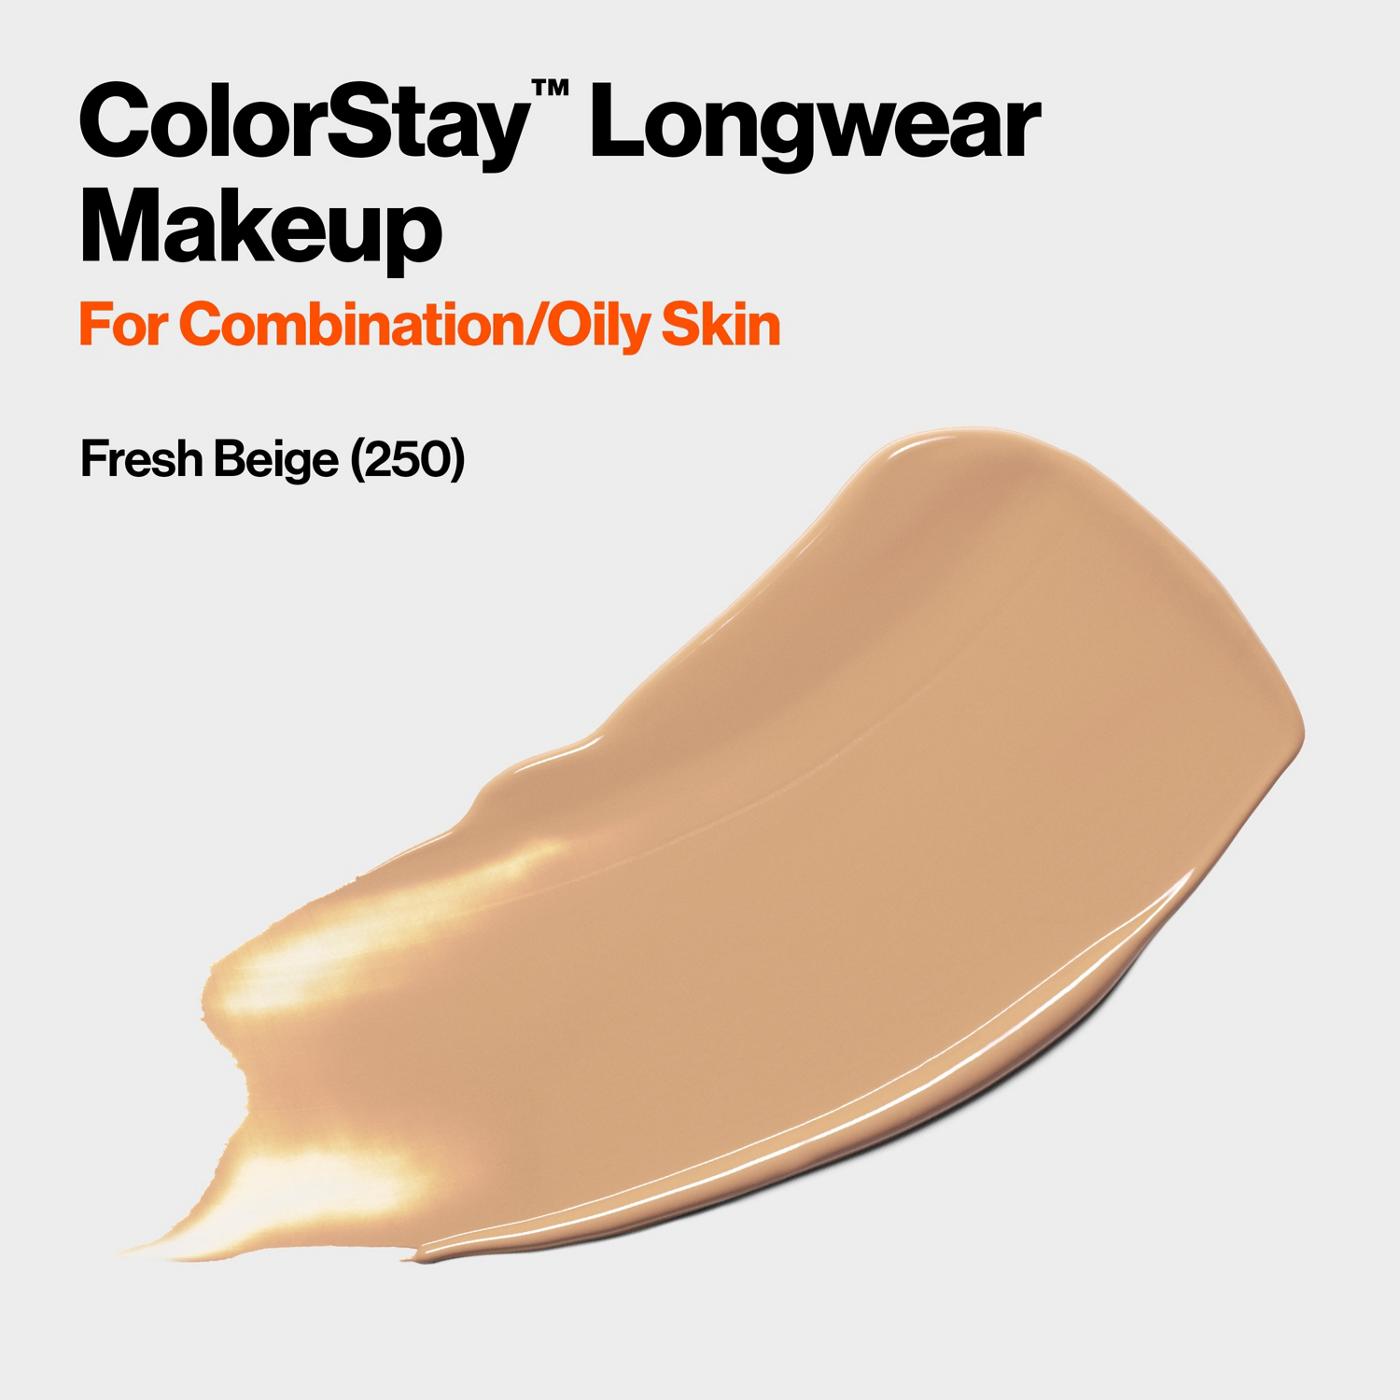 Revlon ColorStay Foundation for Combination/Oily Skin - 250 Fresh Beige; image 5 of 6